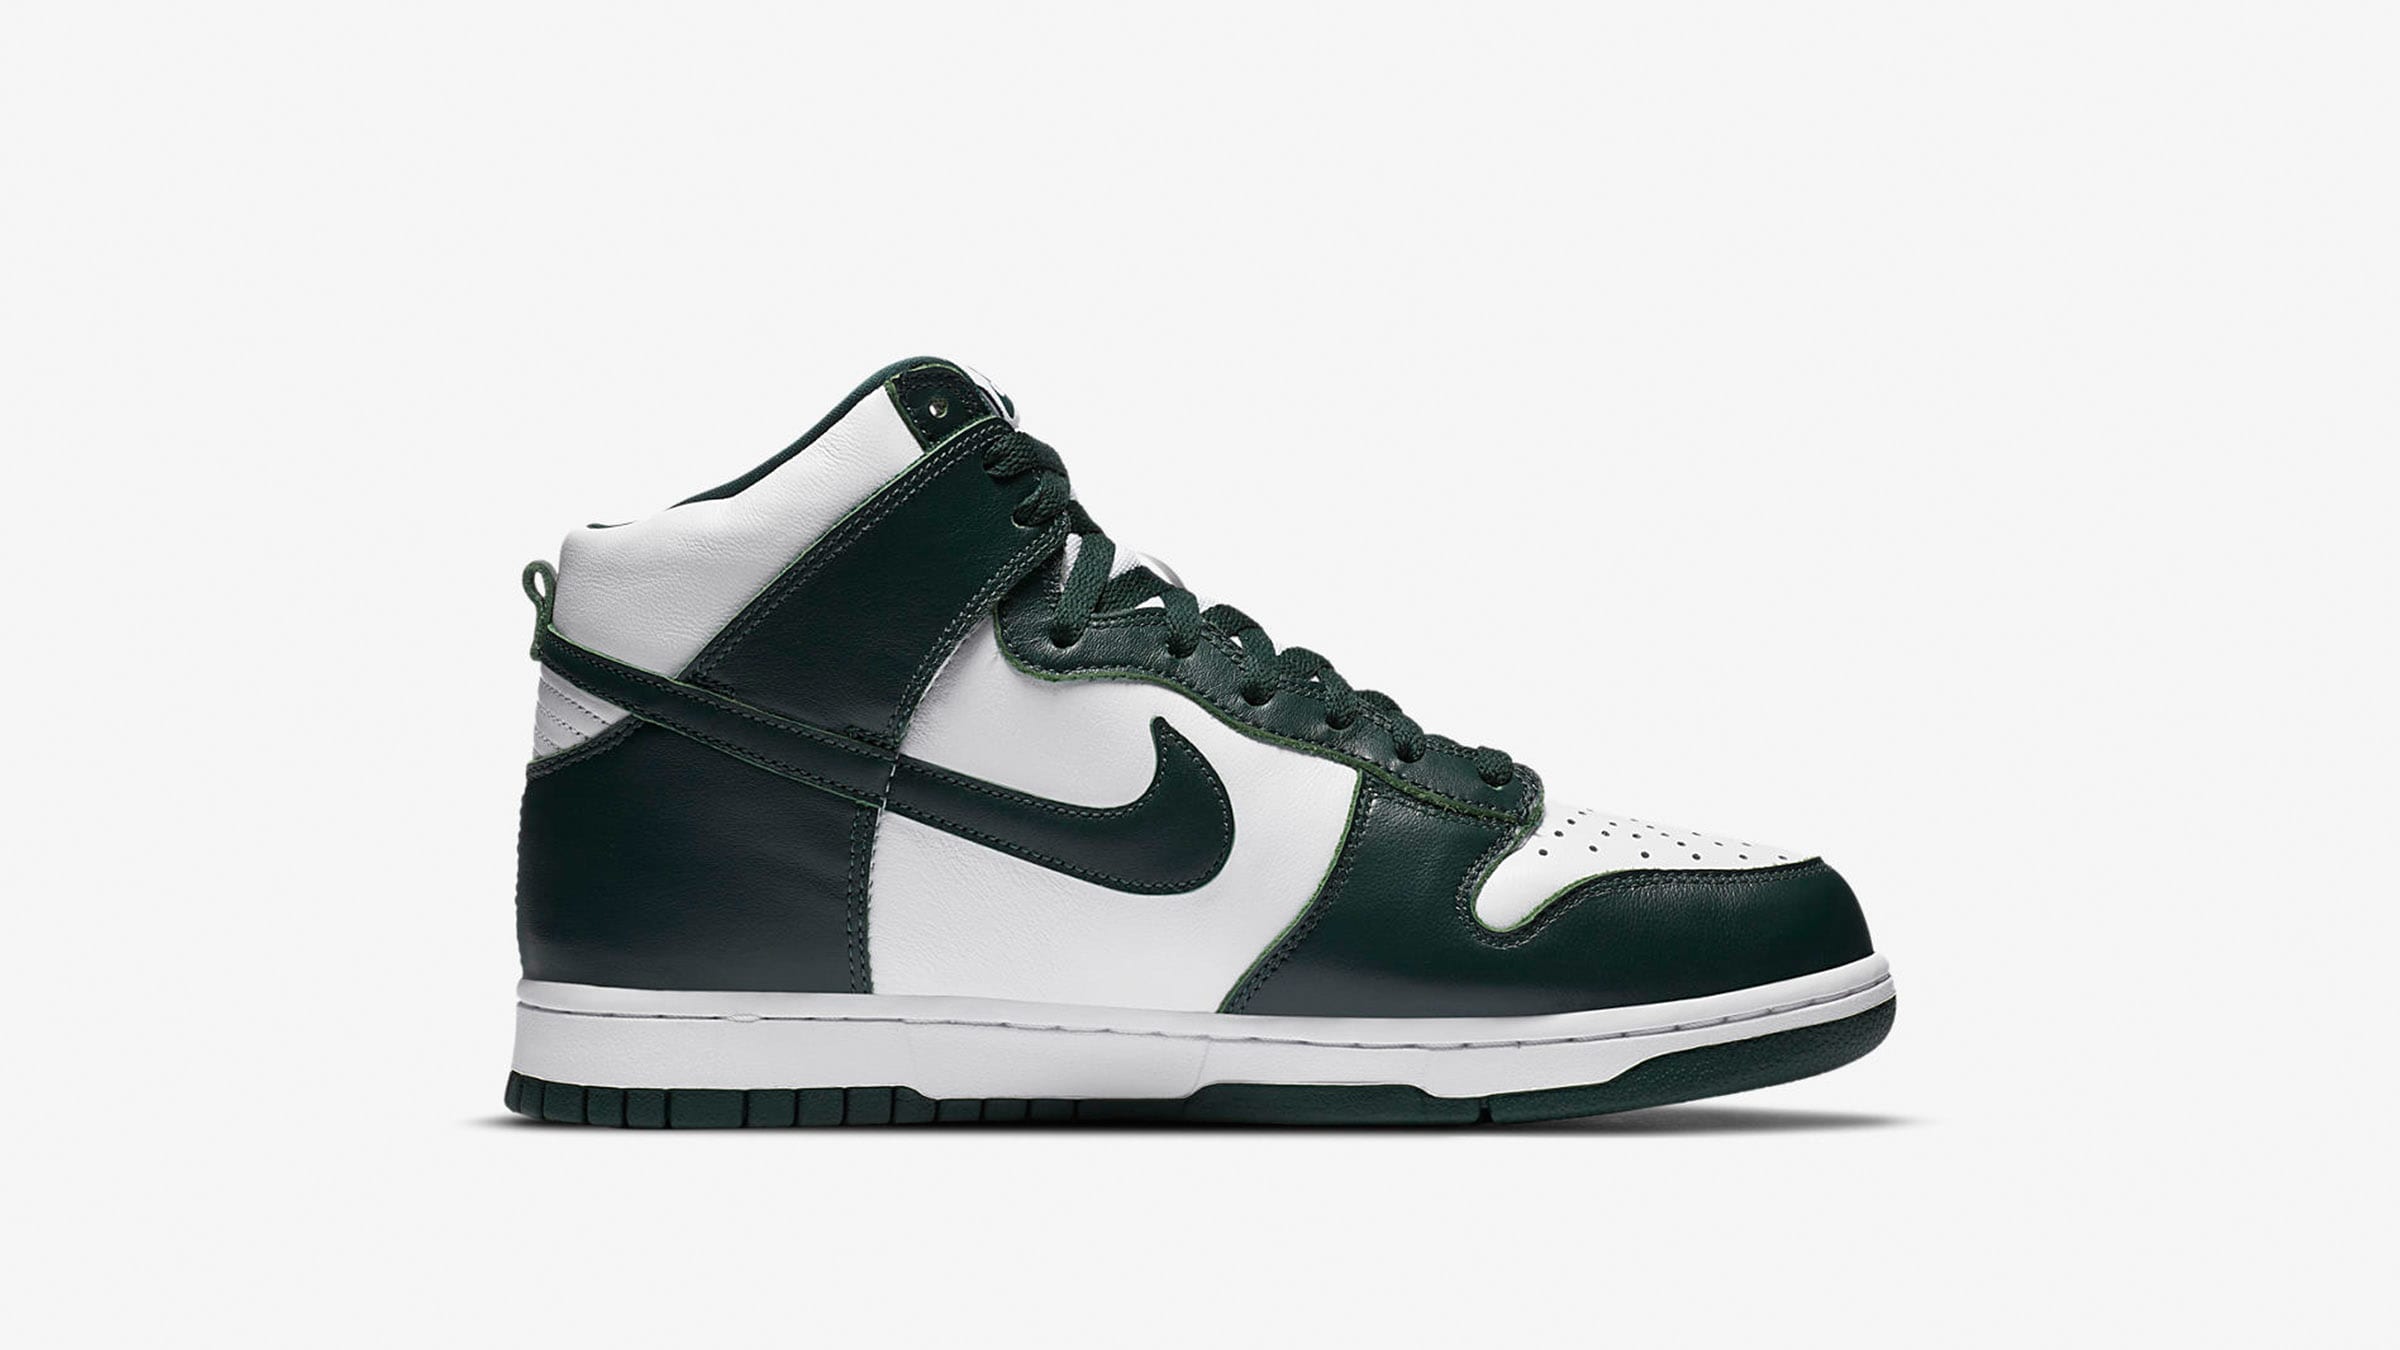 Nike Dunk Hi SP (White & Pro Green) | END. Launches